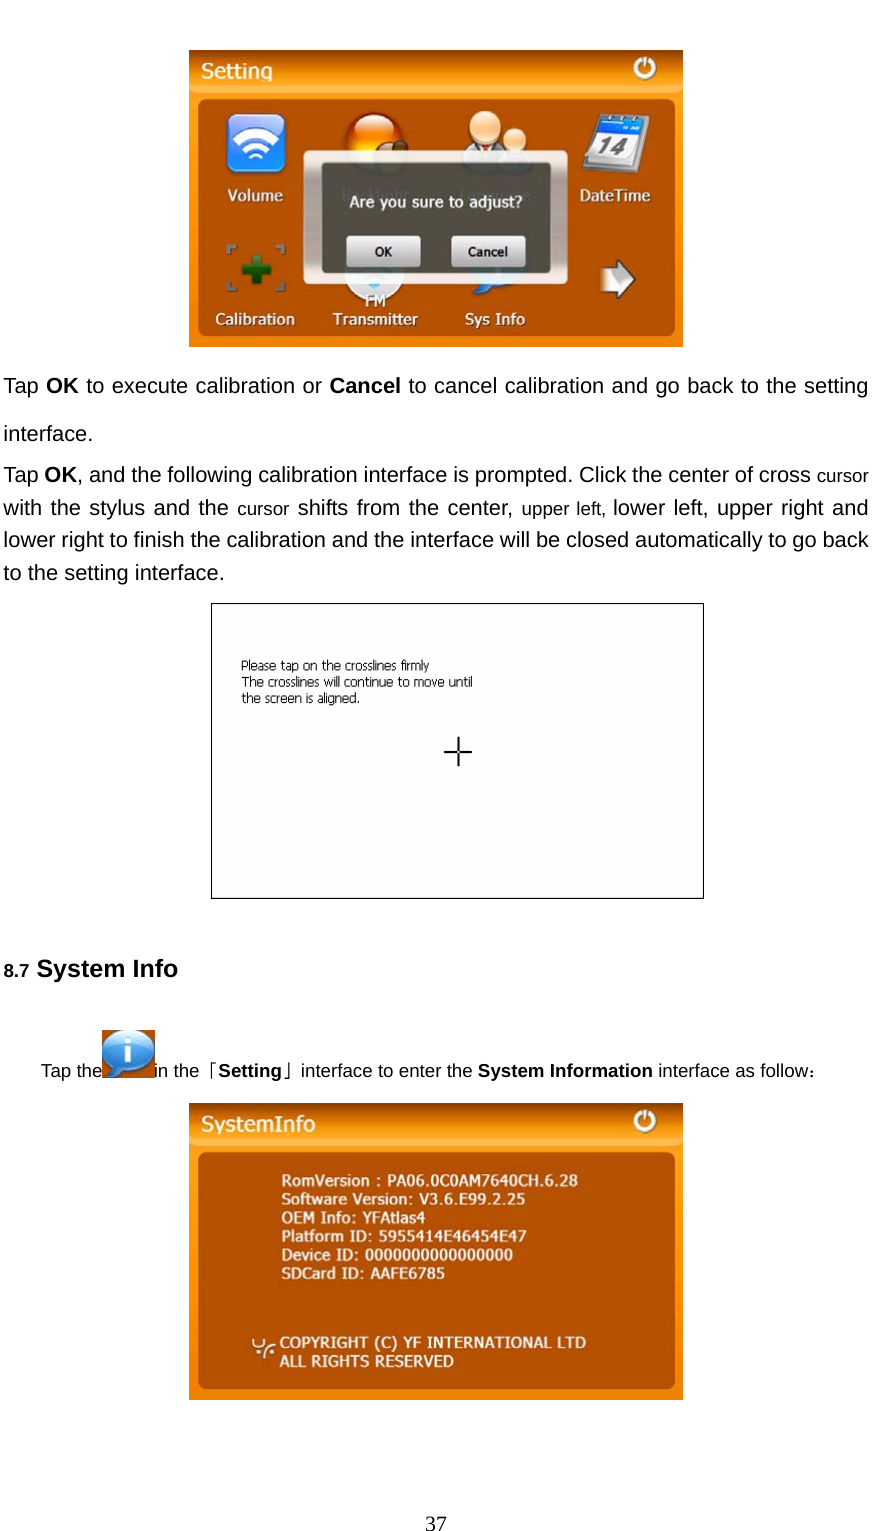  37  Tap OK to execute calibration or Cancel to cancel calibration and go back to the setting interface. Tap OK, and the following calibration interface is prompted. Click the center of cross cursor with the stylus and the cursor shifts from the center, upper left, lower left, upper right and lower right to finish the calibration and the interface will be closed automatically to go back to the setting interface.  8.7 System Info Tap the in the「Setting」interface to enter the System Information interface as follow：  